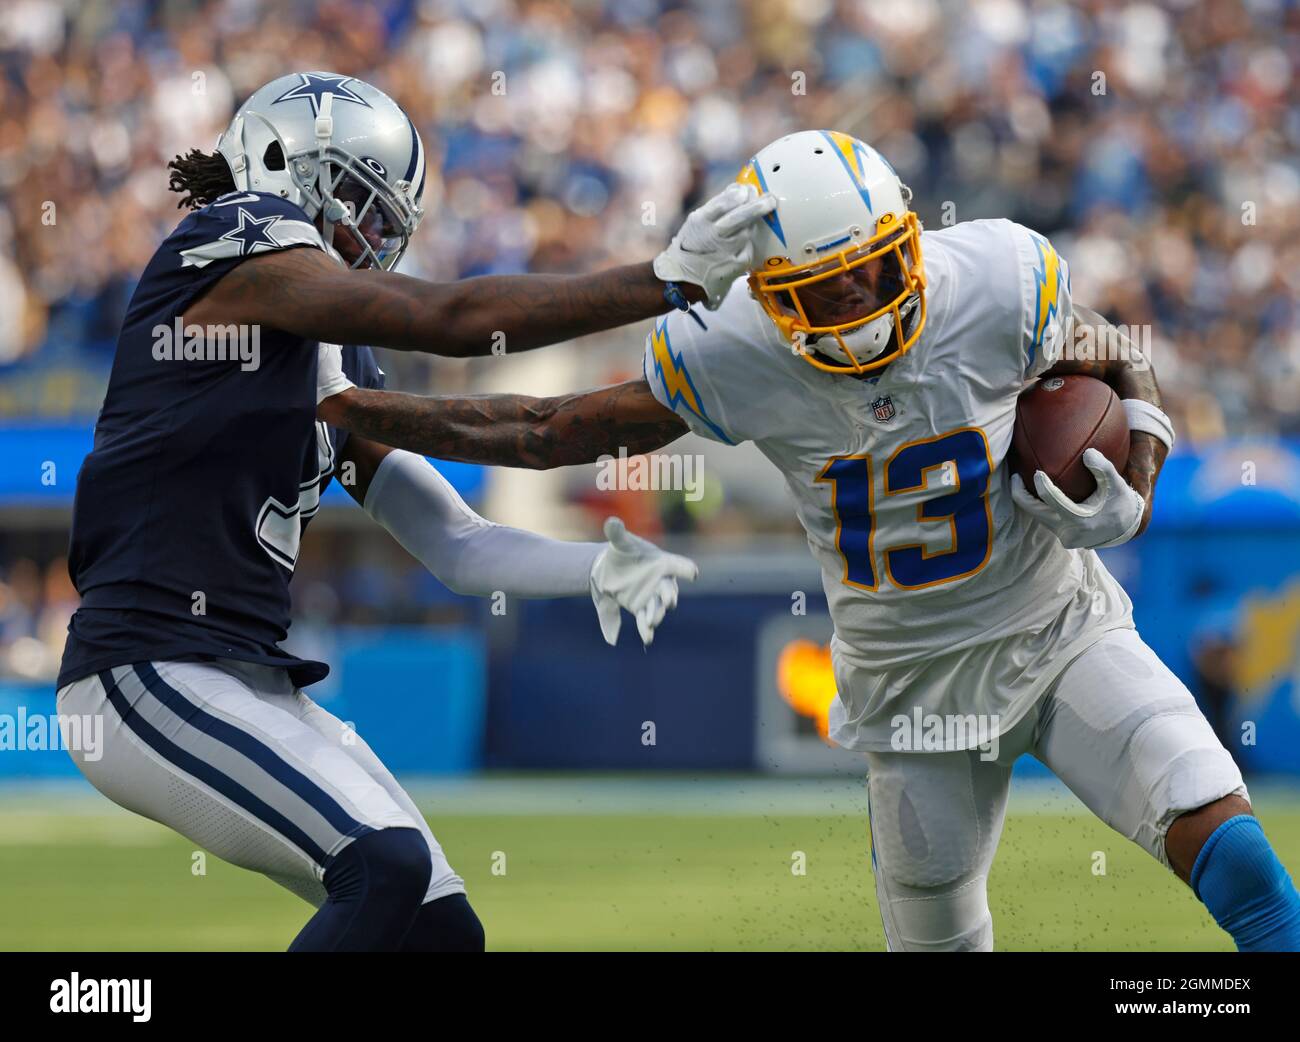 Inglewood, California, USA. 19th Sep, 2021. Los Angeles Chargers wide  receiver Keenan Allen (13) carries the ball as Dallas Cowboys corner back  Trevon Diggs (7) makes the tackle during the NFL football